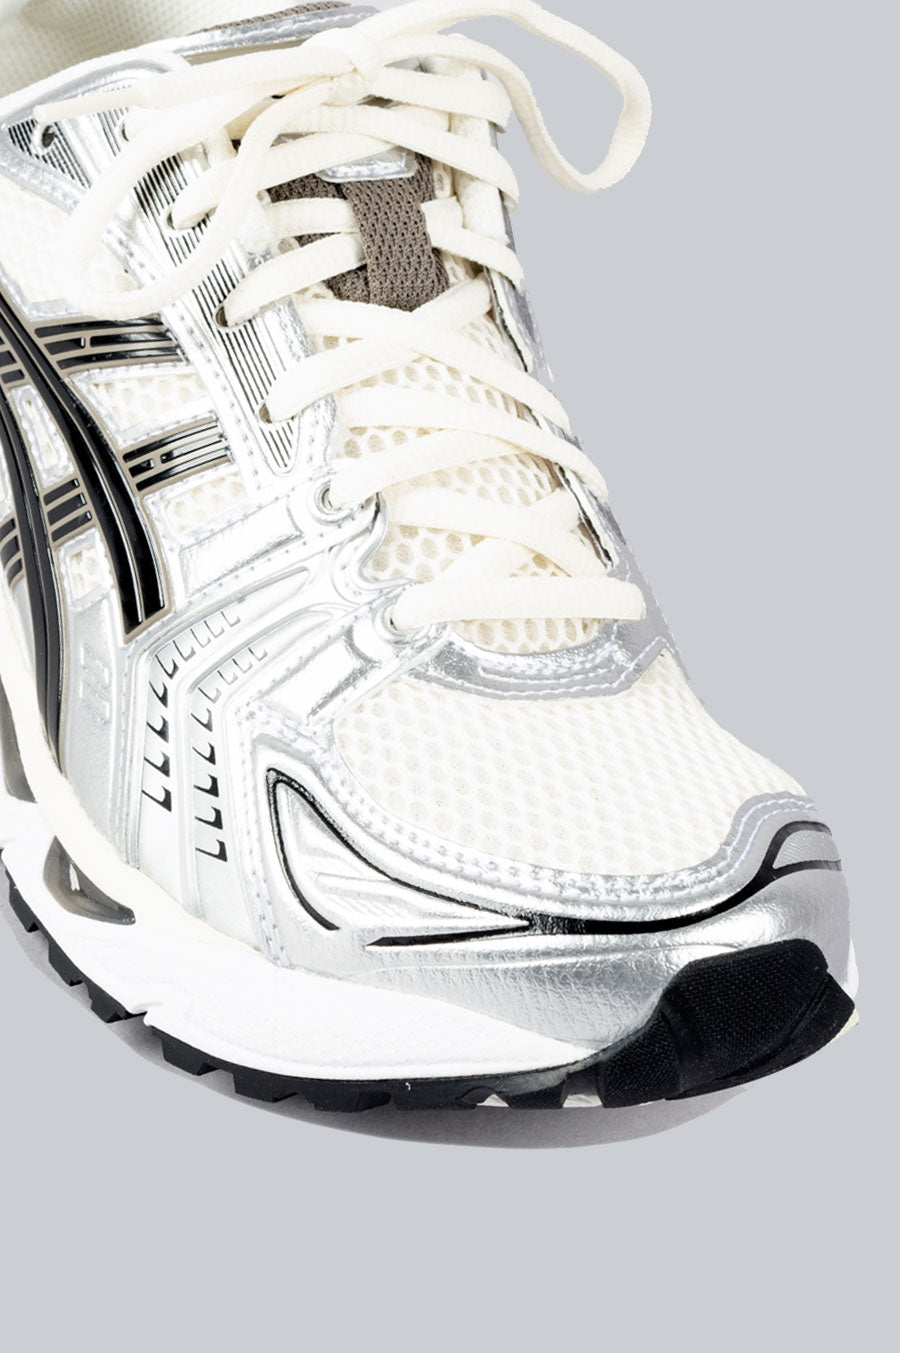 Asics shoes Gel-Kayano 14 white color 1201A019